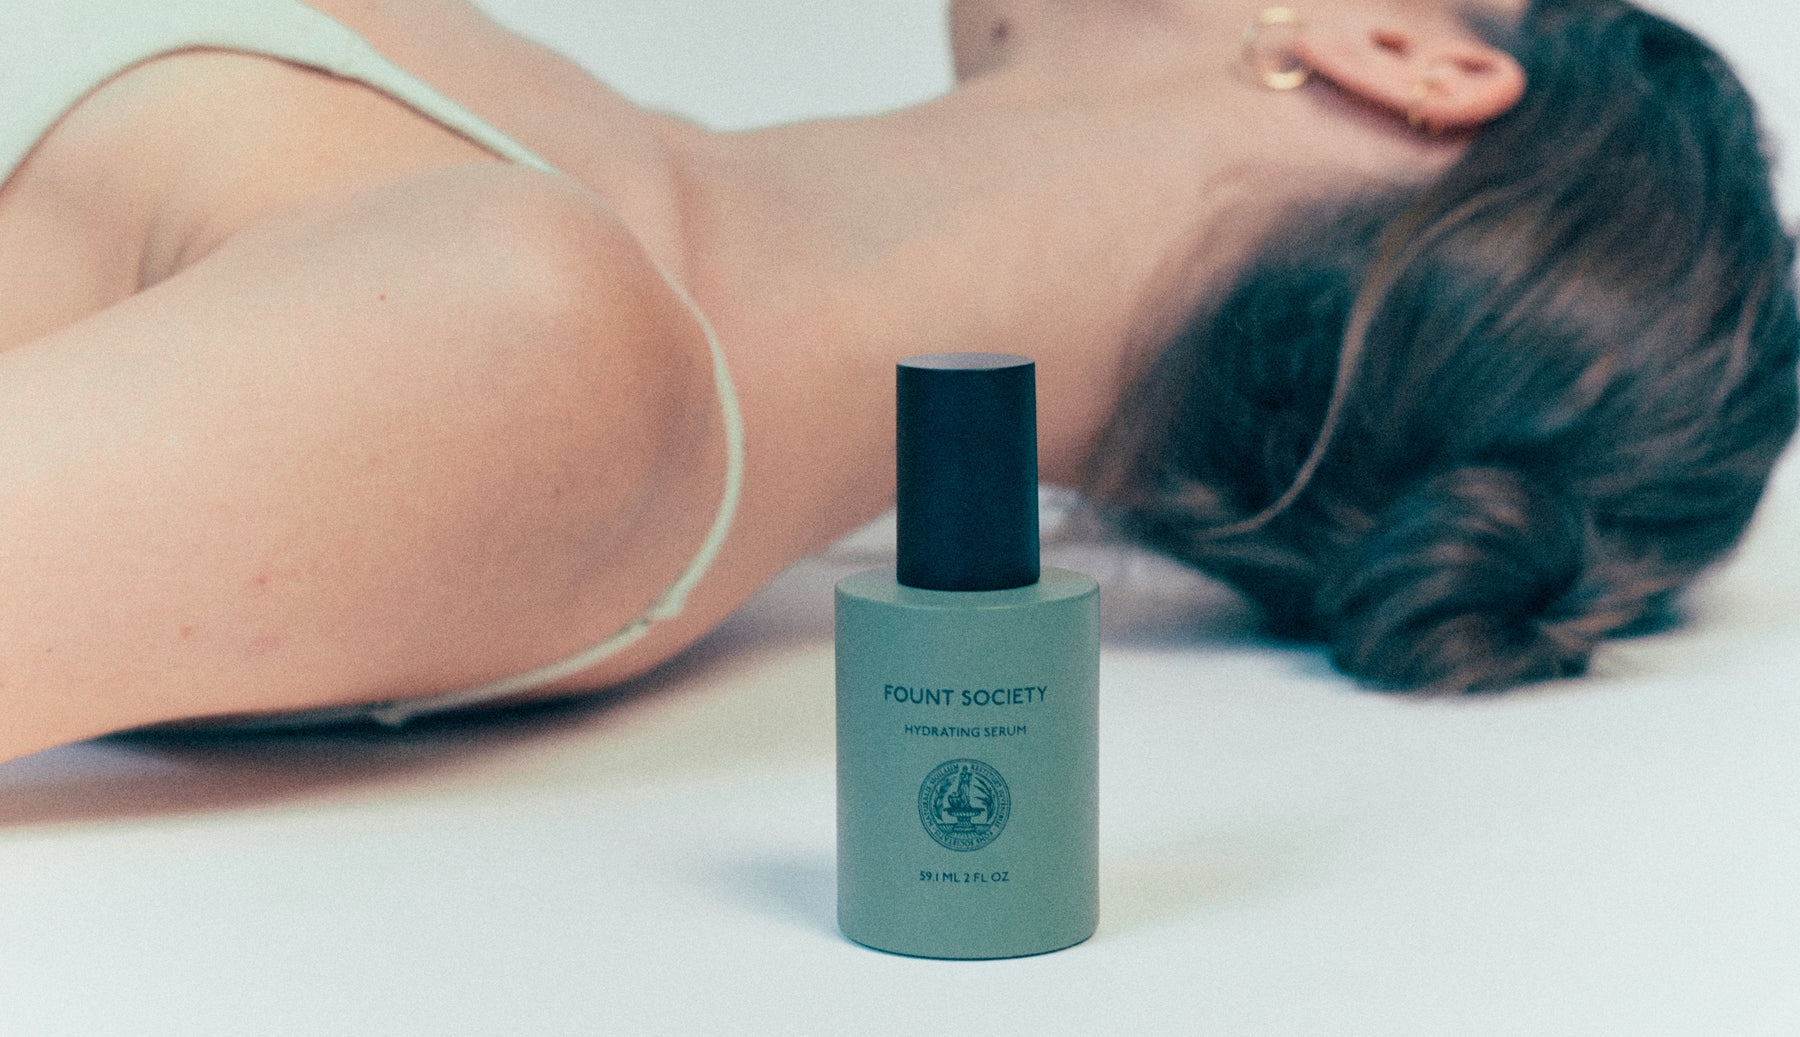 Fount Society's Hydrating Serum with a woman in background